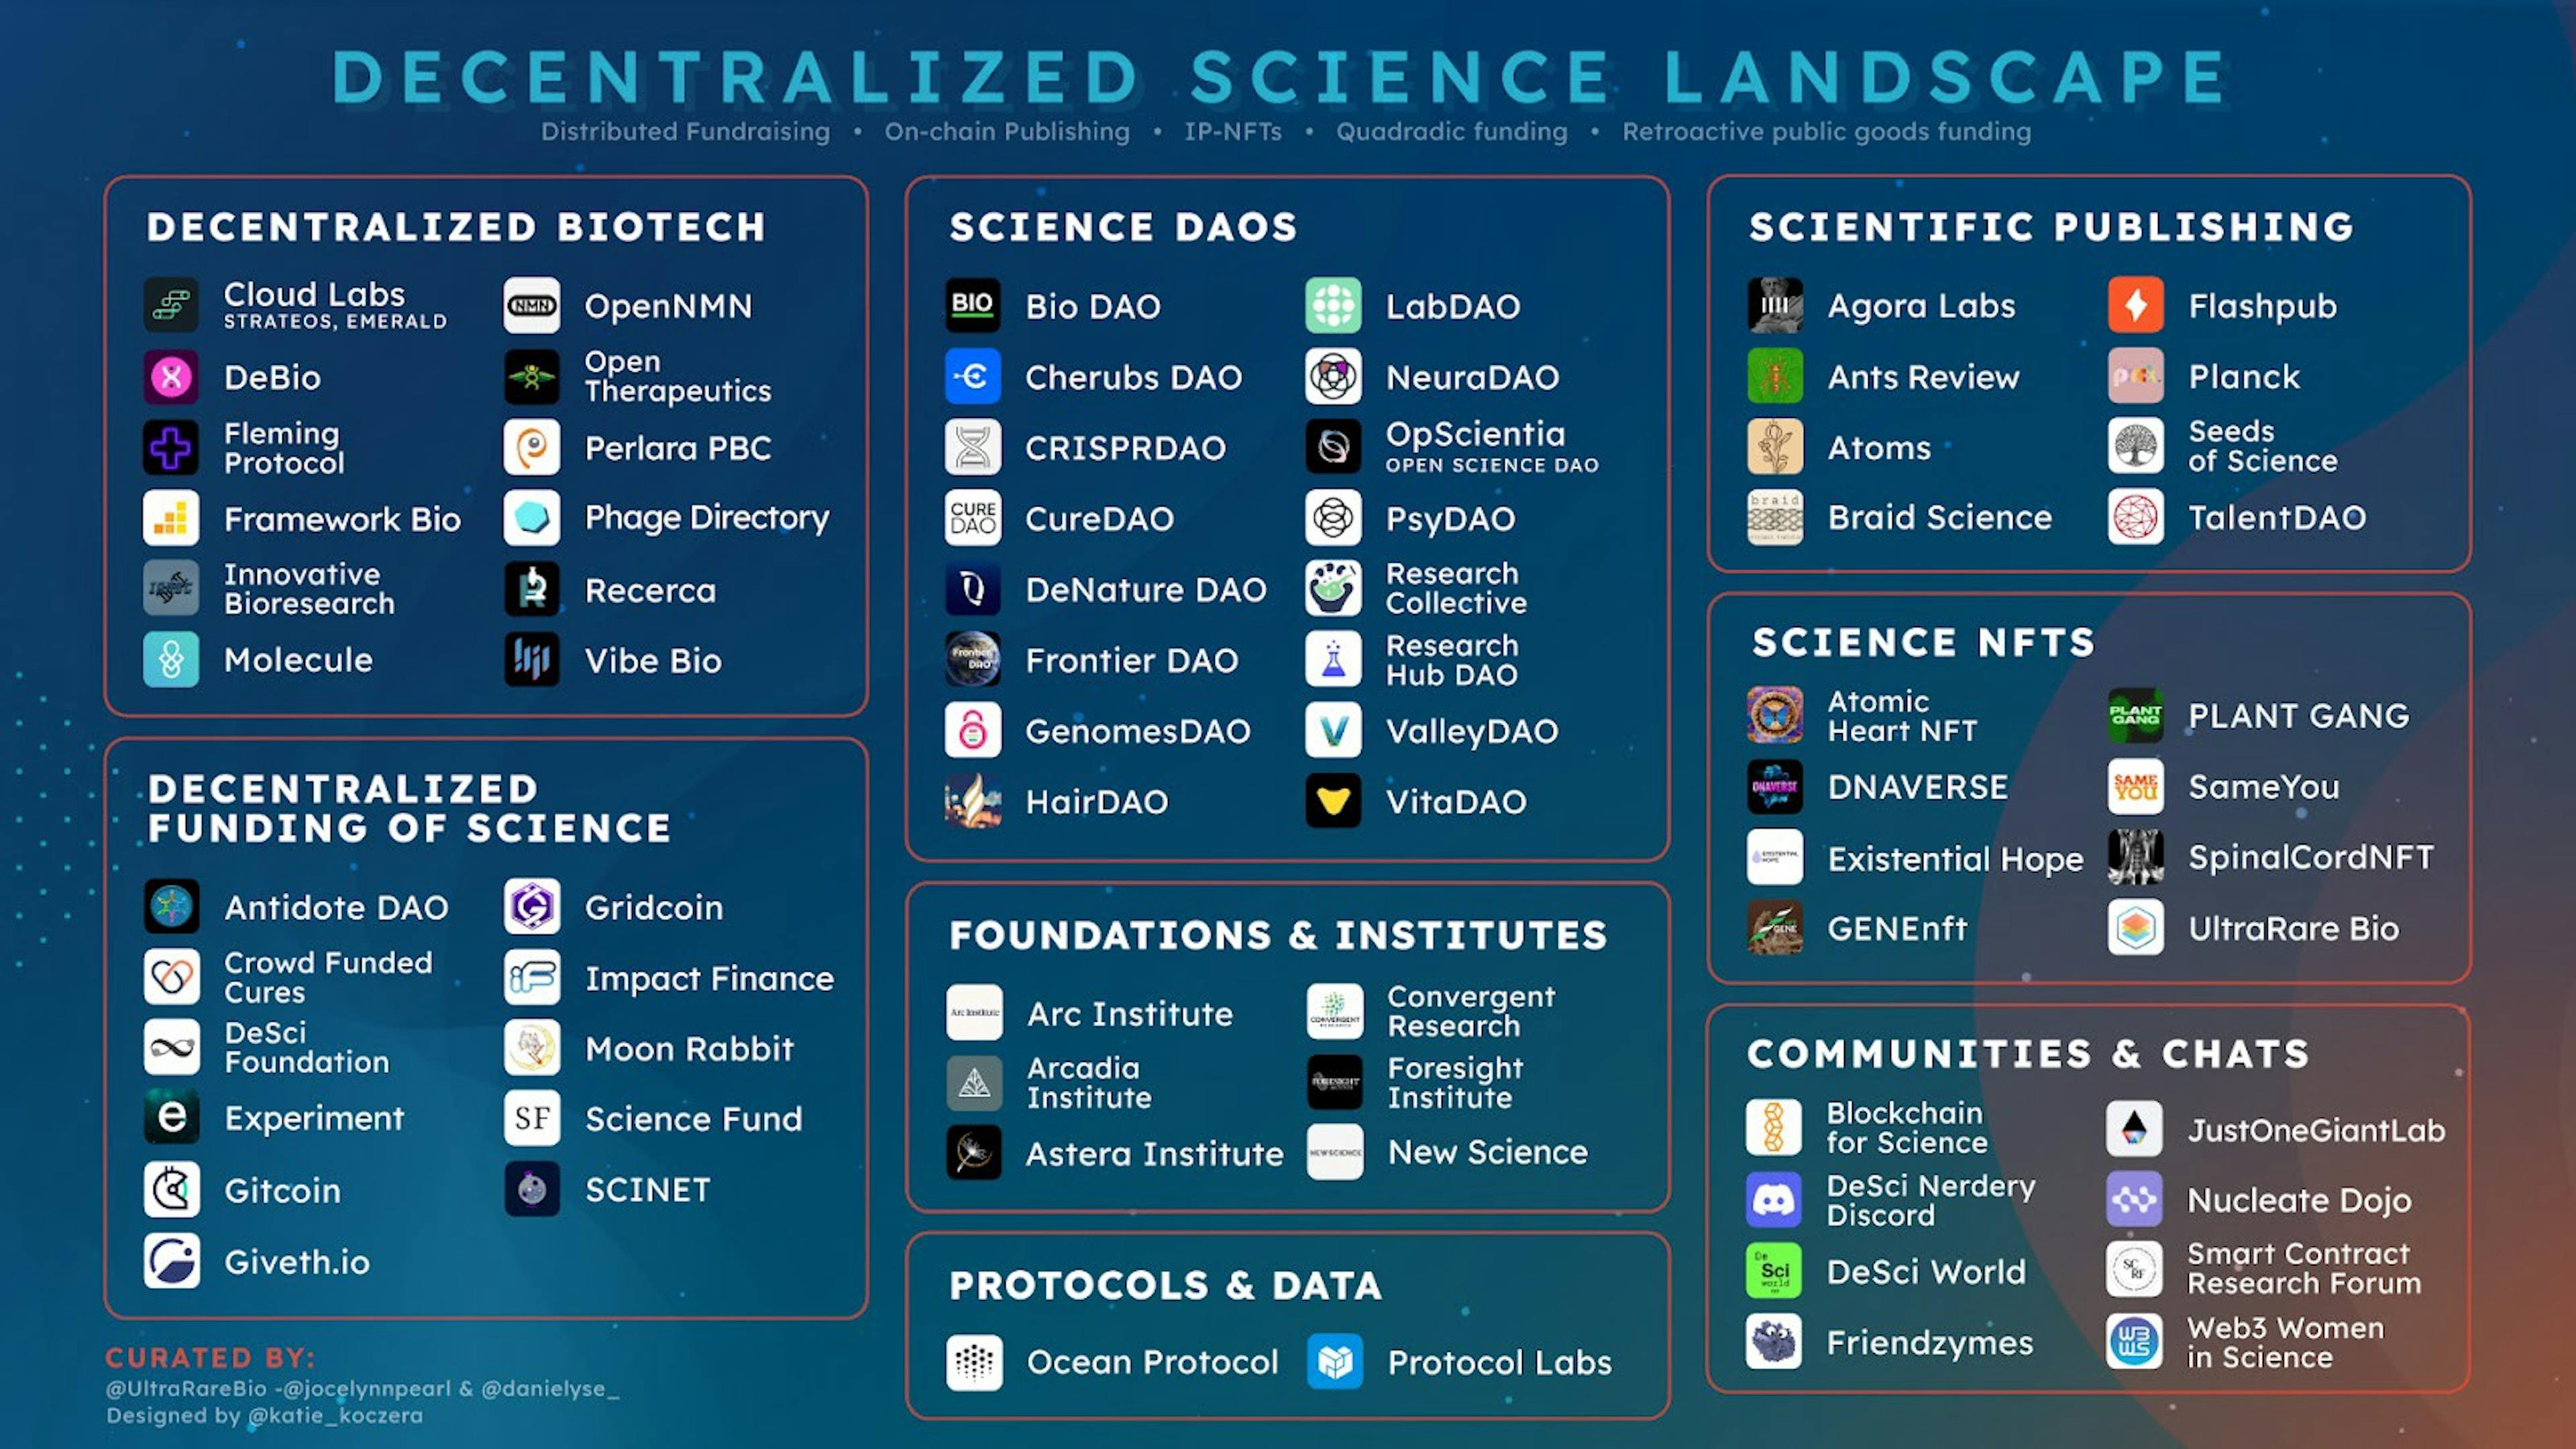 The Decentralized Science Landscape figure is by the UltraRare Bio